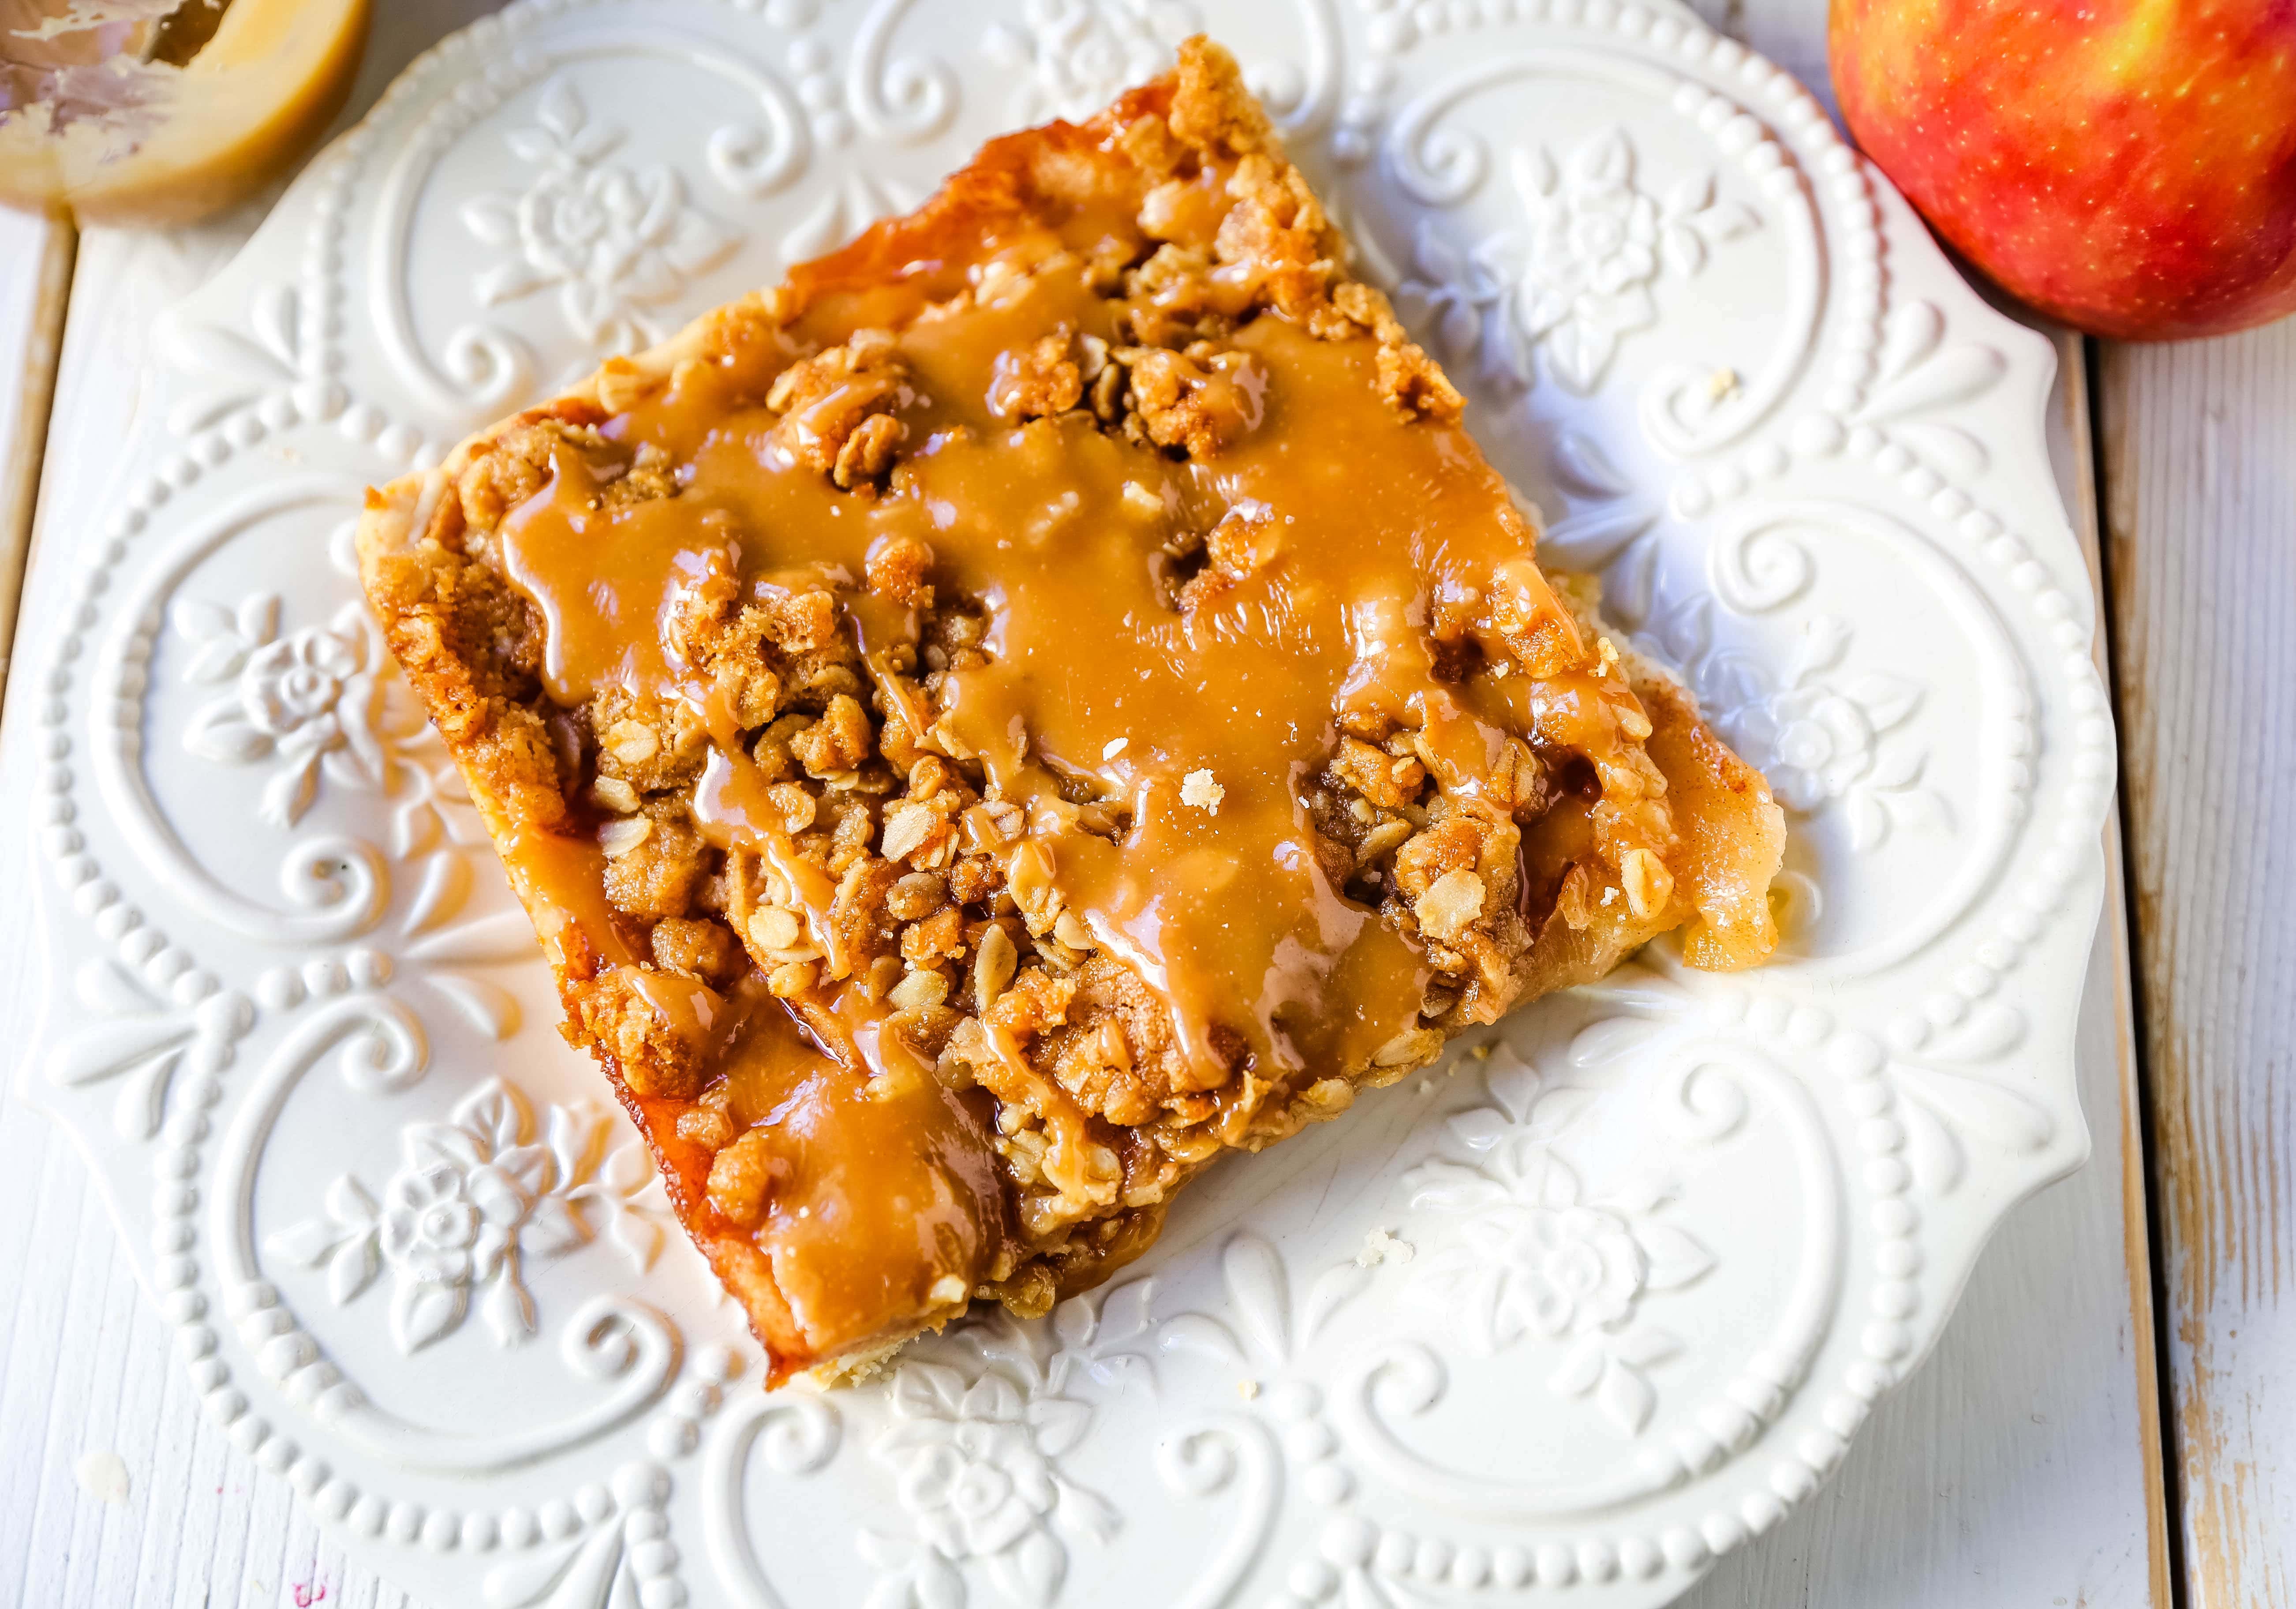 Caramel Apple Slab Pie Juicy cinnamon sugar apples baked in a flaky pie crust and topped with a buttery brown sugar crumb topping then drizzled with homemade salted caramel. An easy way to make apple pie to feed a crowd! www.modernhoney.com #applepie #apples #caramelapplepie #appleslabpie #slabpie